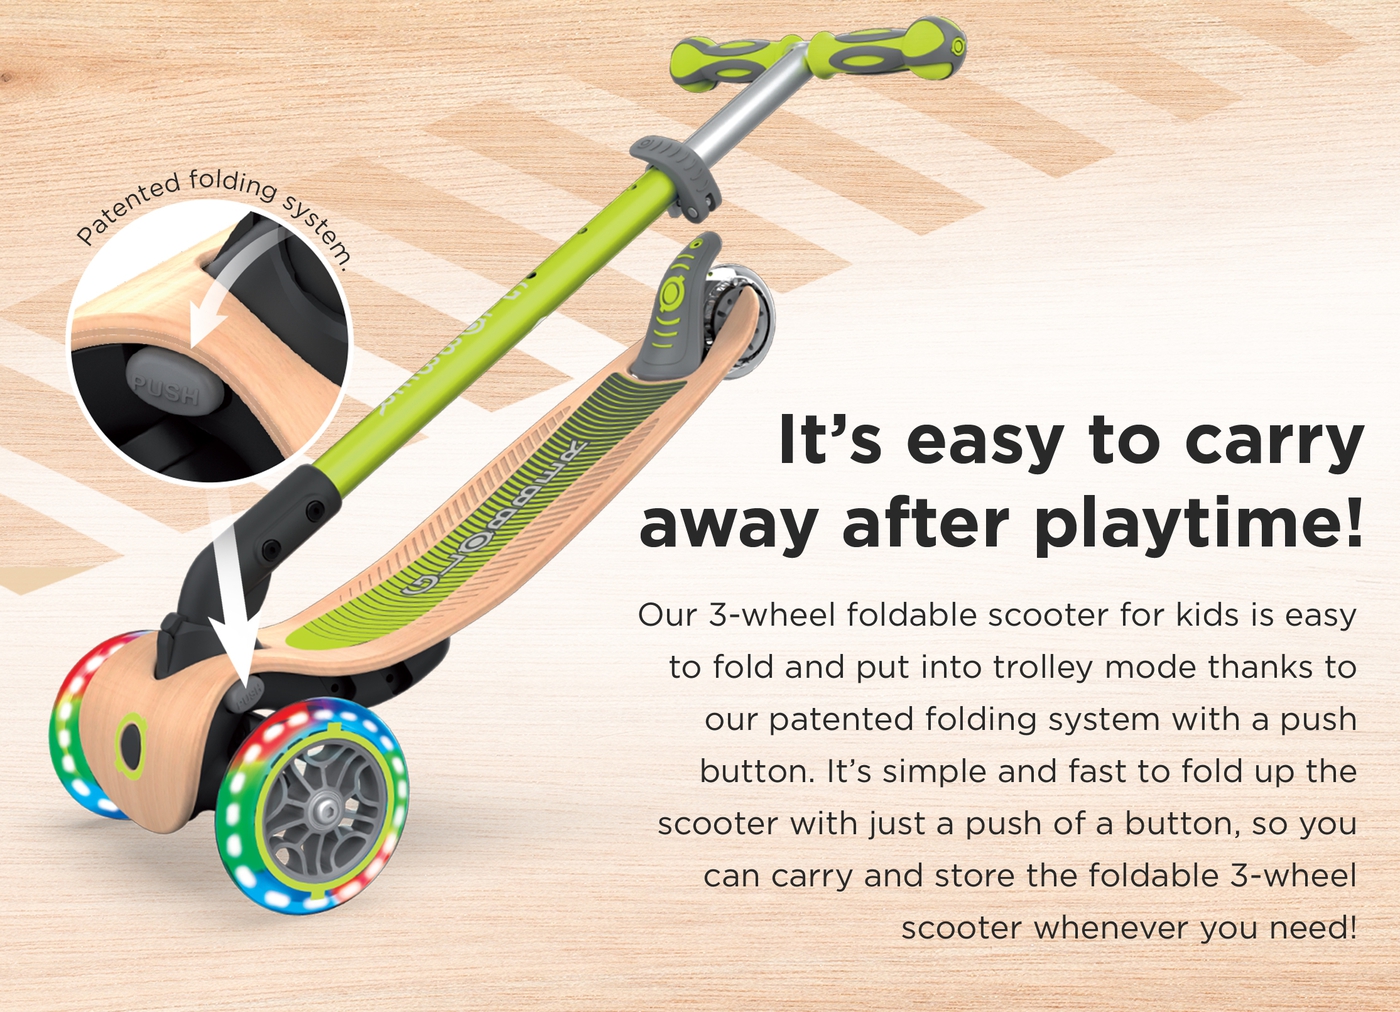 It’s easy to carry away after playtime! Our 3-wheel foldable scooter for kids is easy to fold and put into trolley mode thanks to our patented folding system with a push button. It’s simple and fast to fold up the scooter with just a push of a button, so you can carry and store the foldable 3-wheel scooter whenever you need!